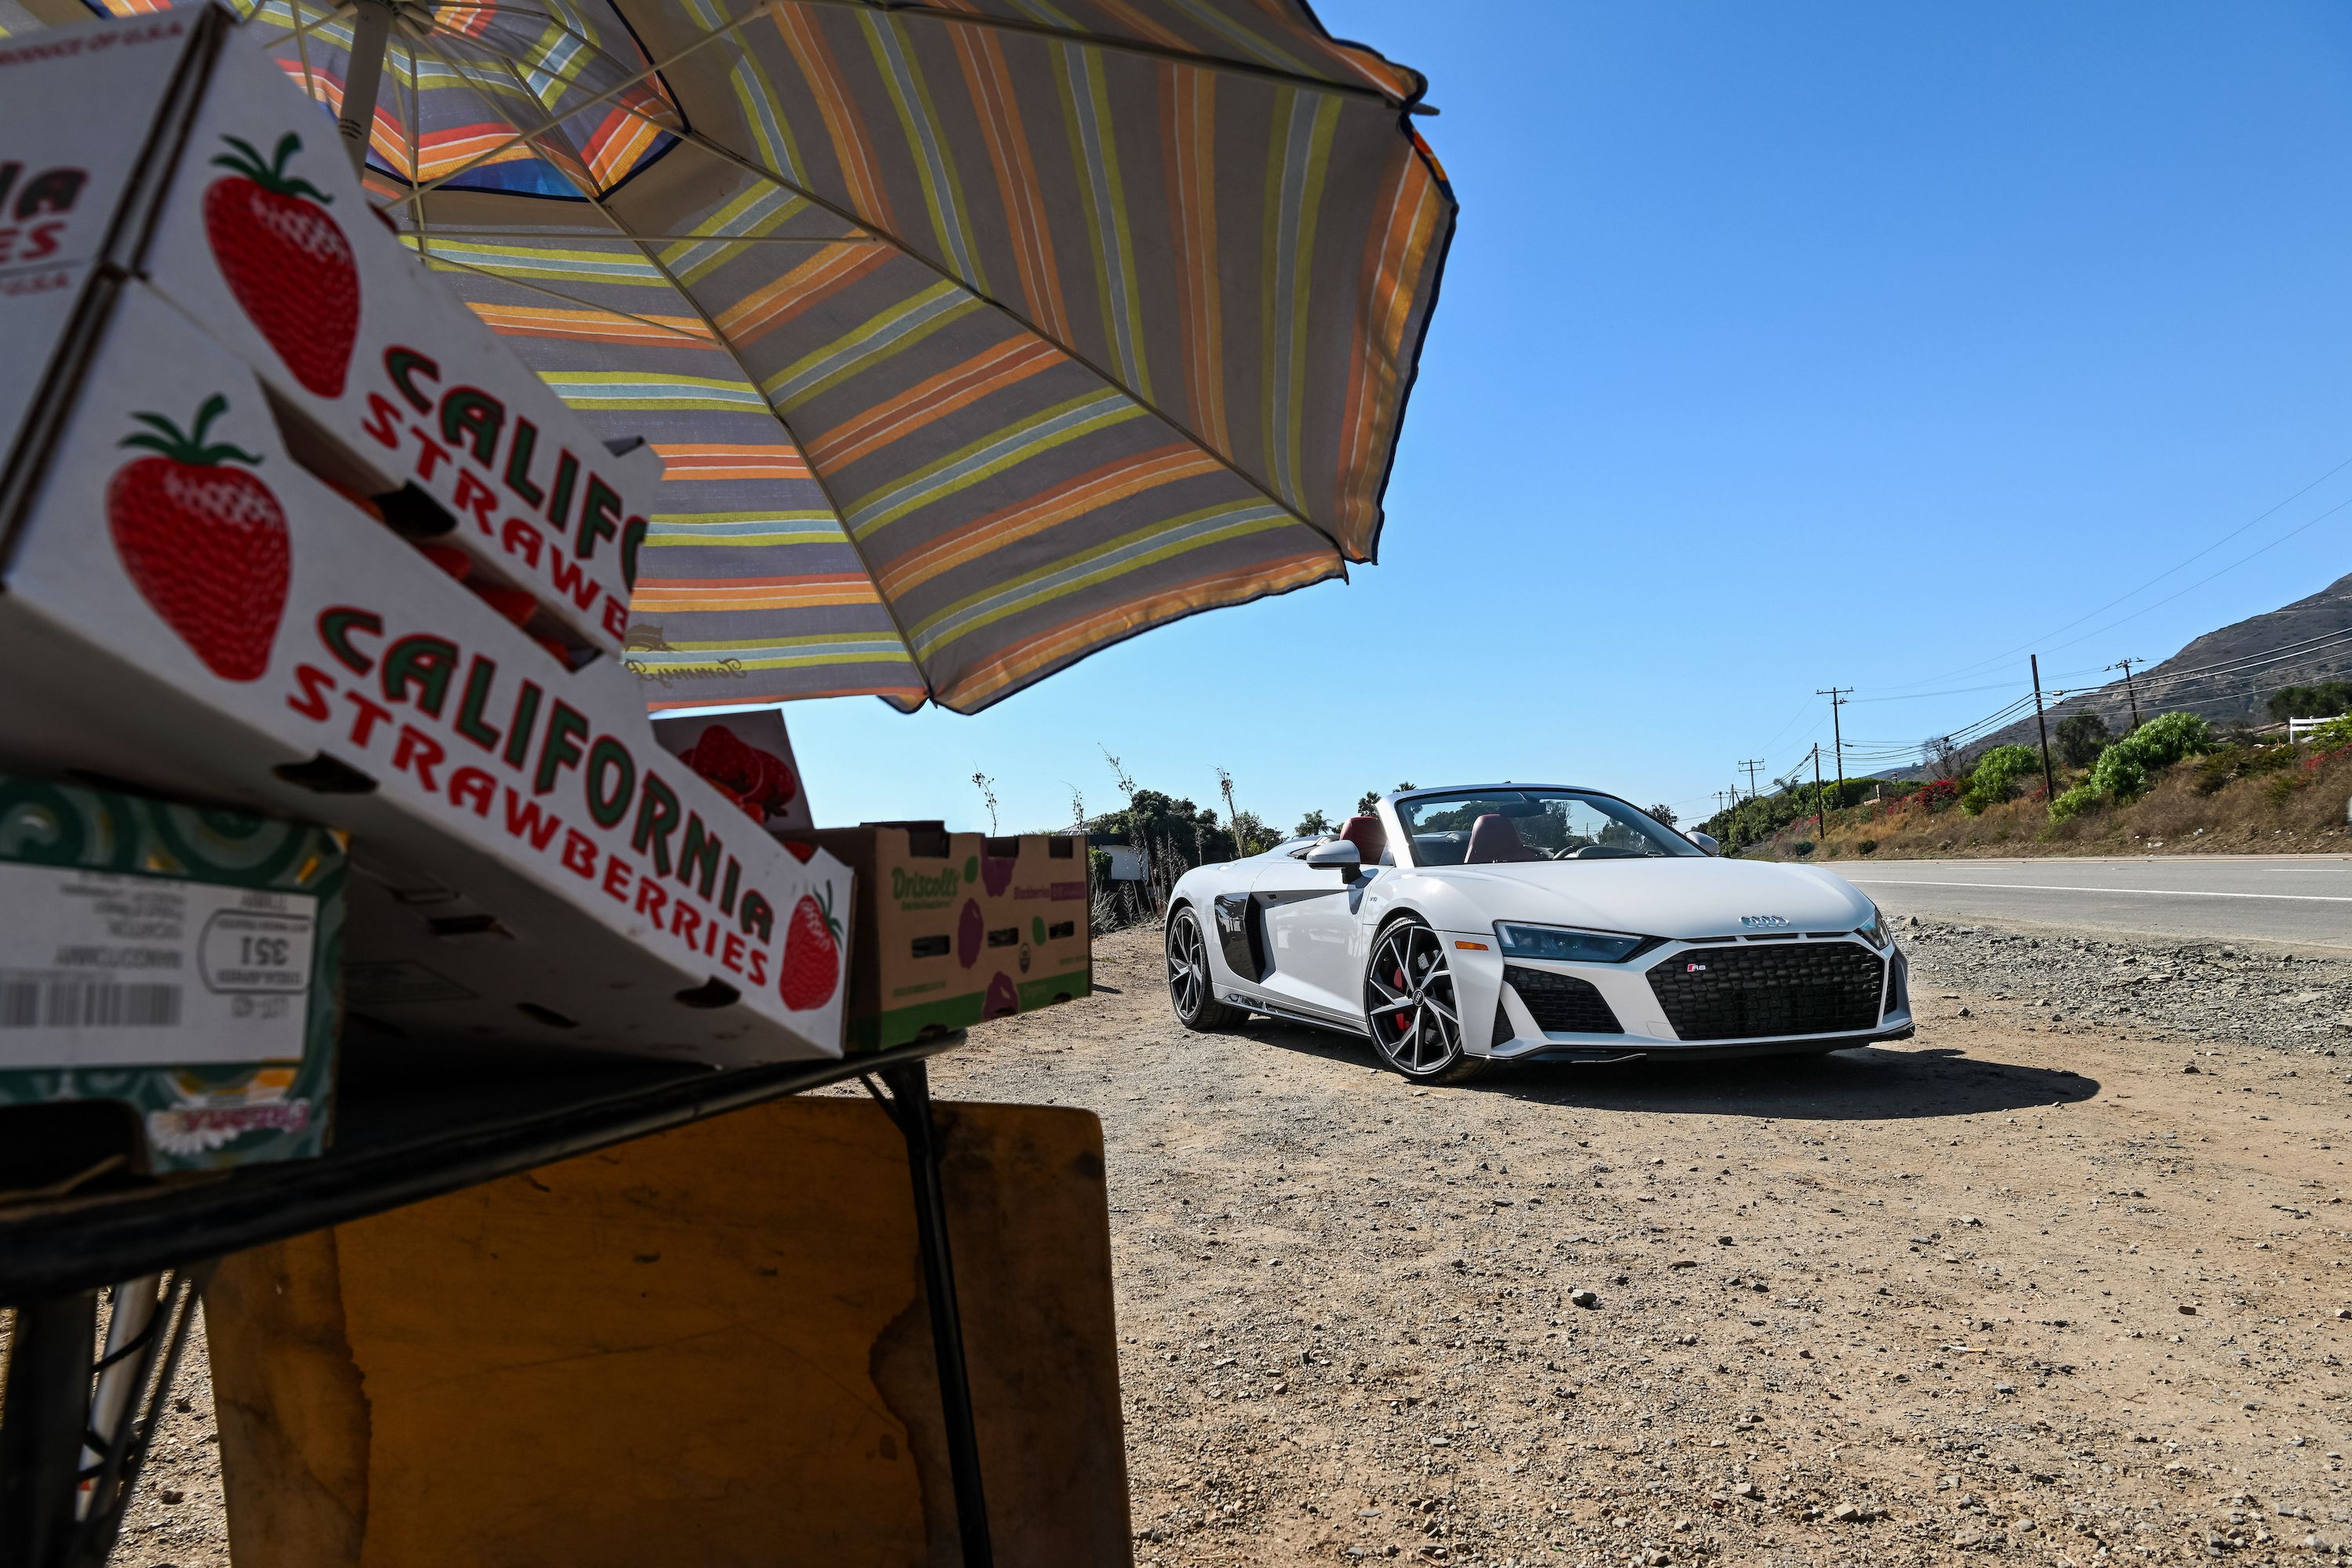 Audi R8 Continues Its Farewell Tour With A Japan Final Edition